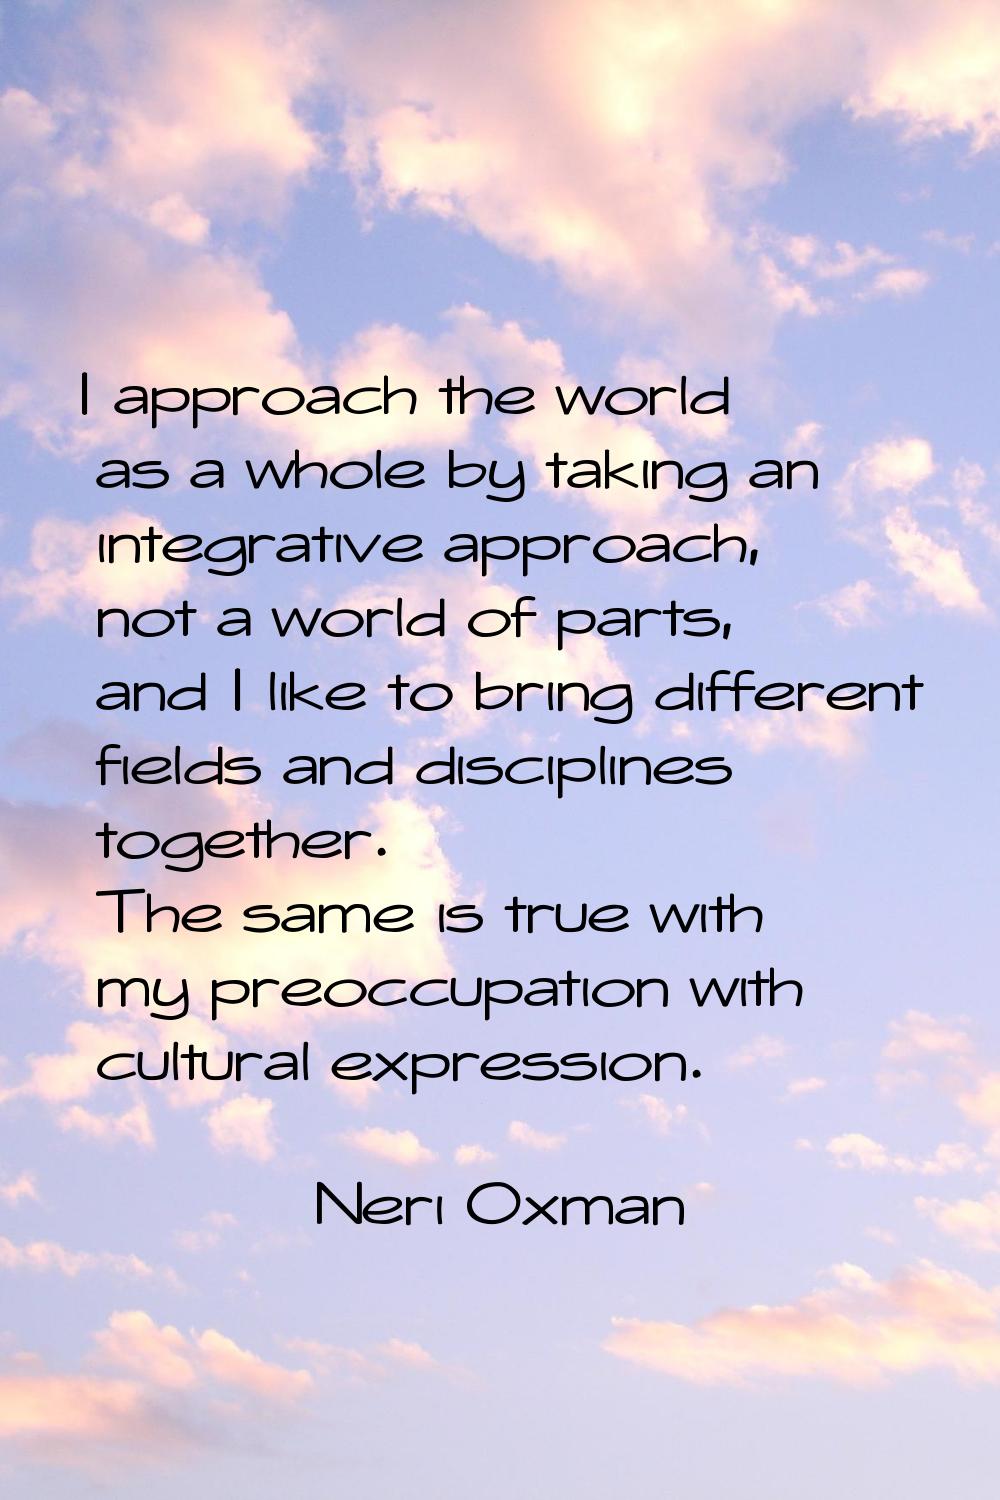 I approach the world as a whole by taking an integrative approach, not a world of parts, and I like